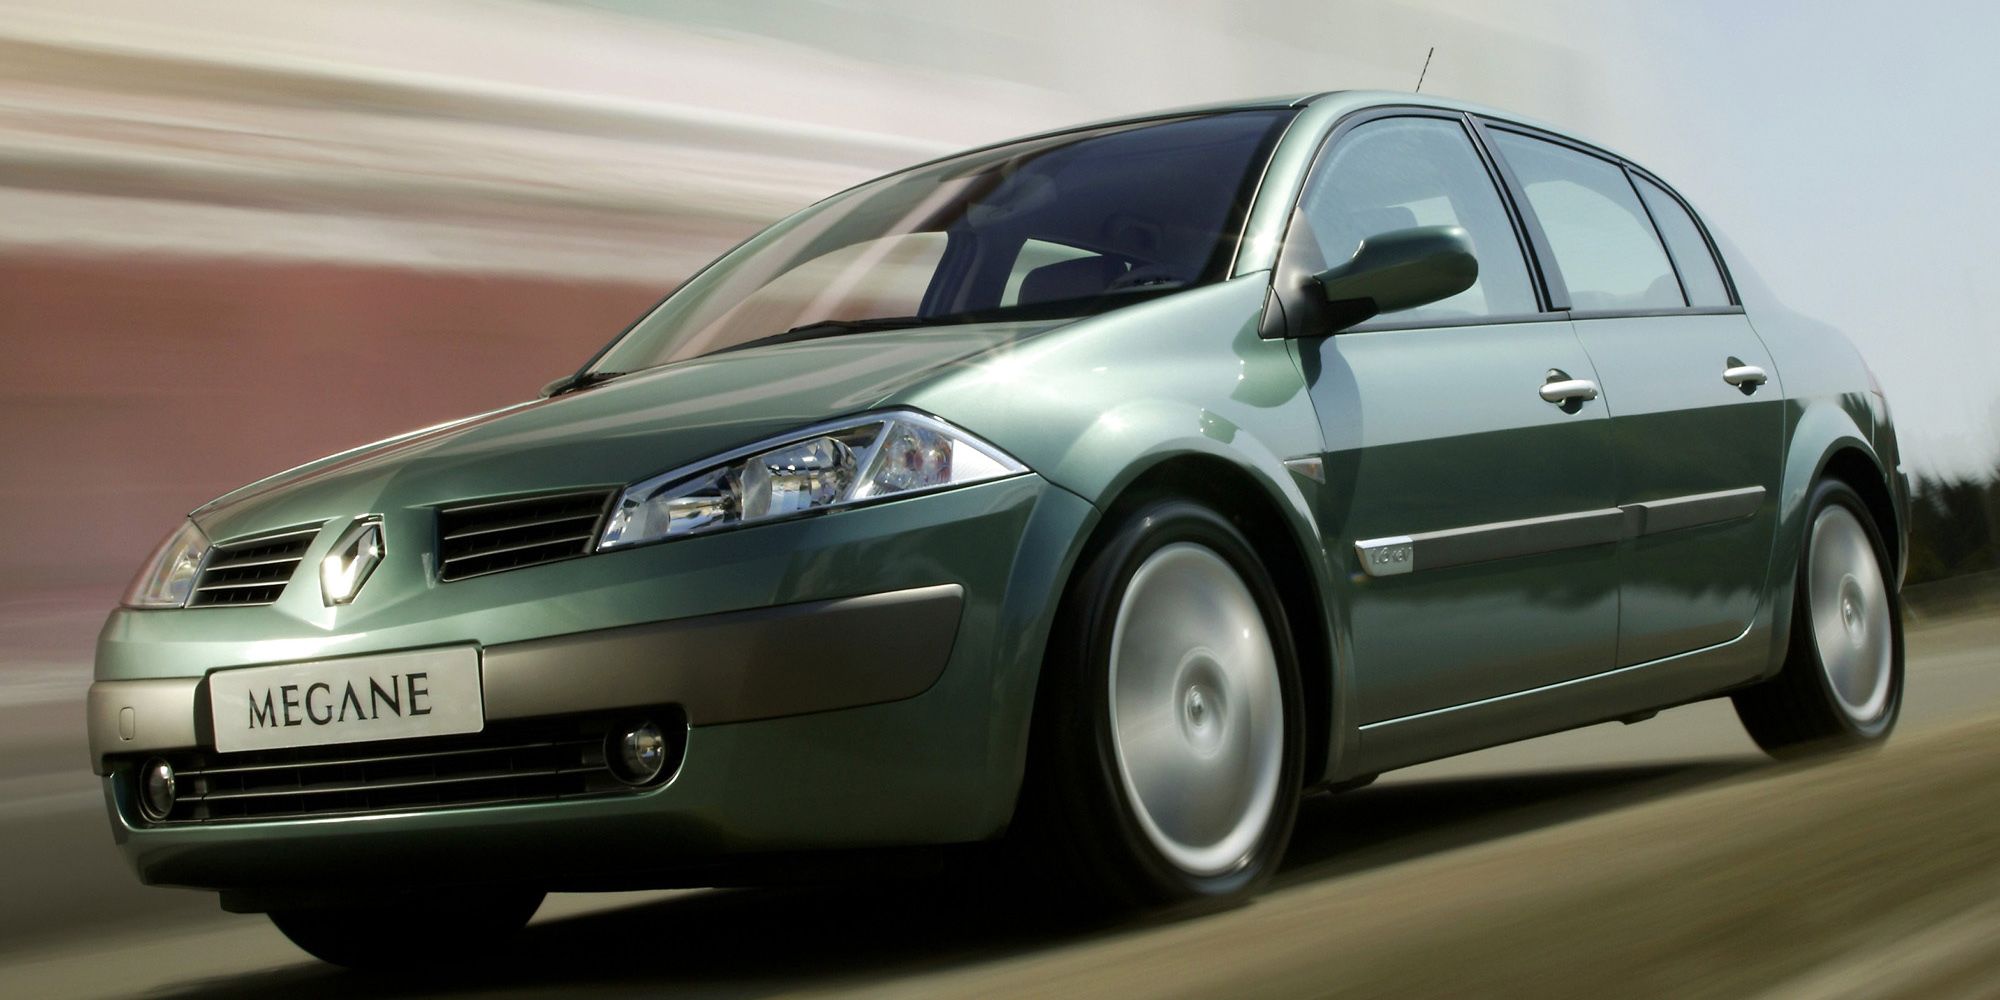 Front 3/4 view of a dark green Megane II sedan on the move